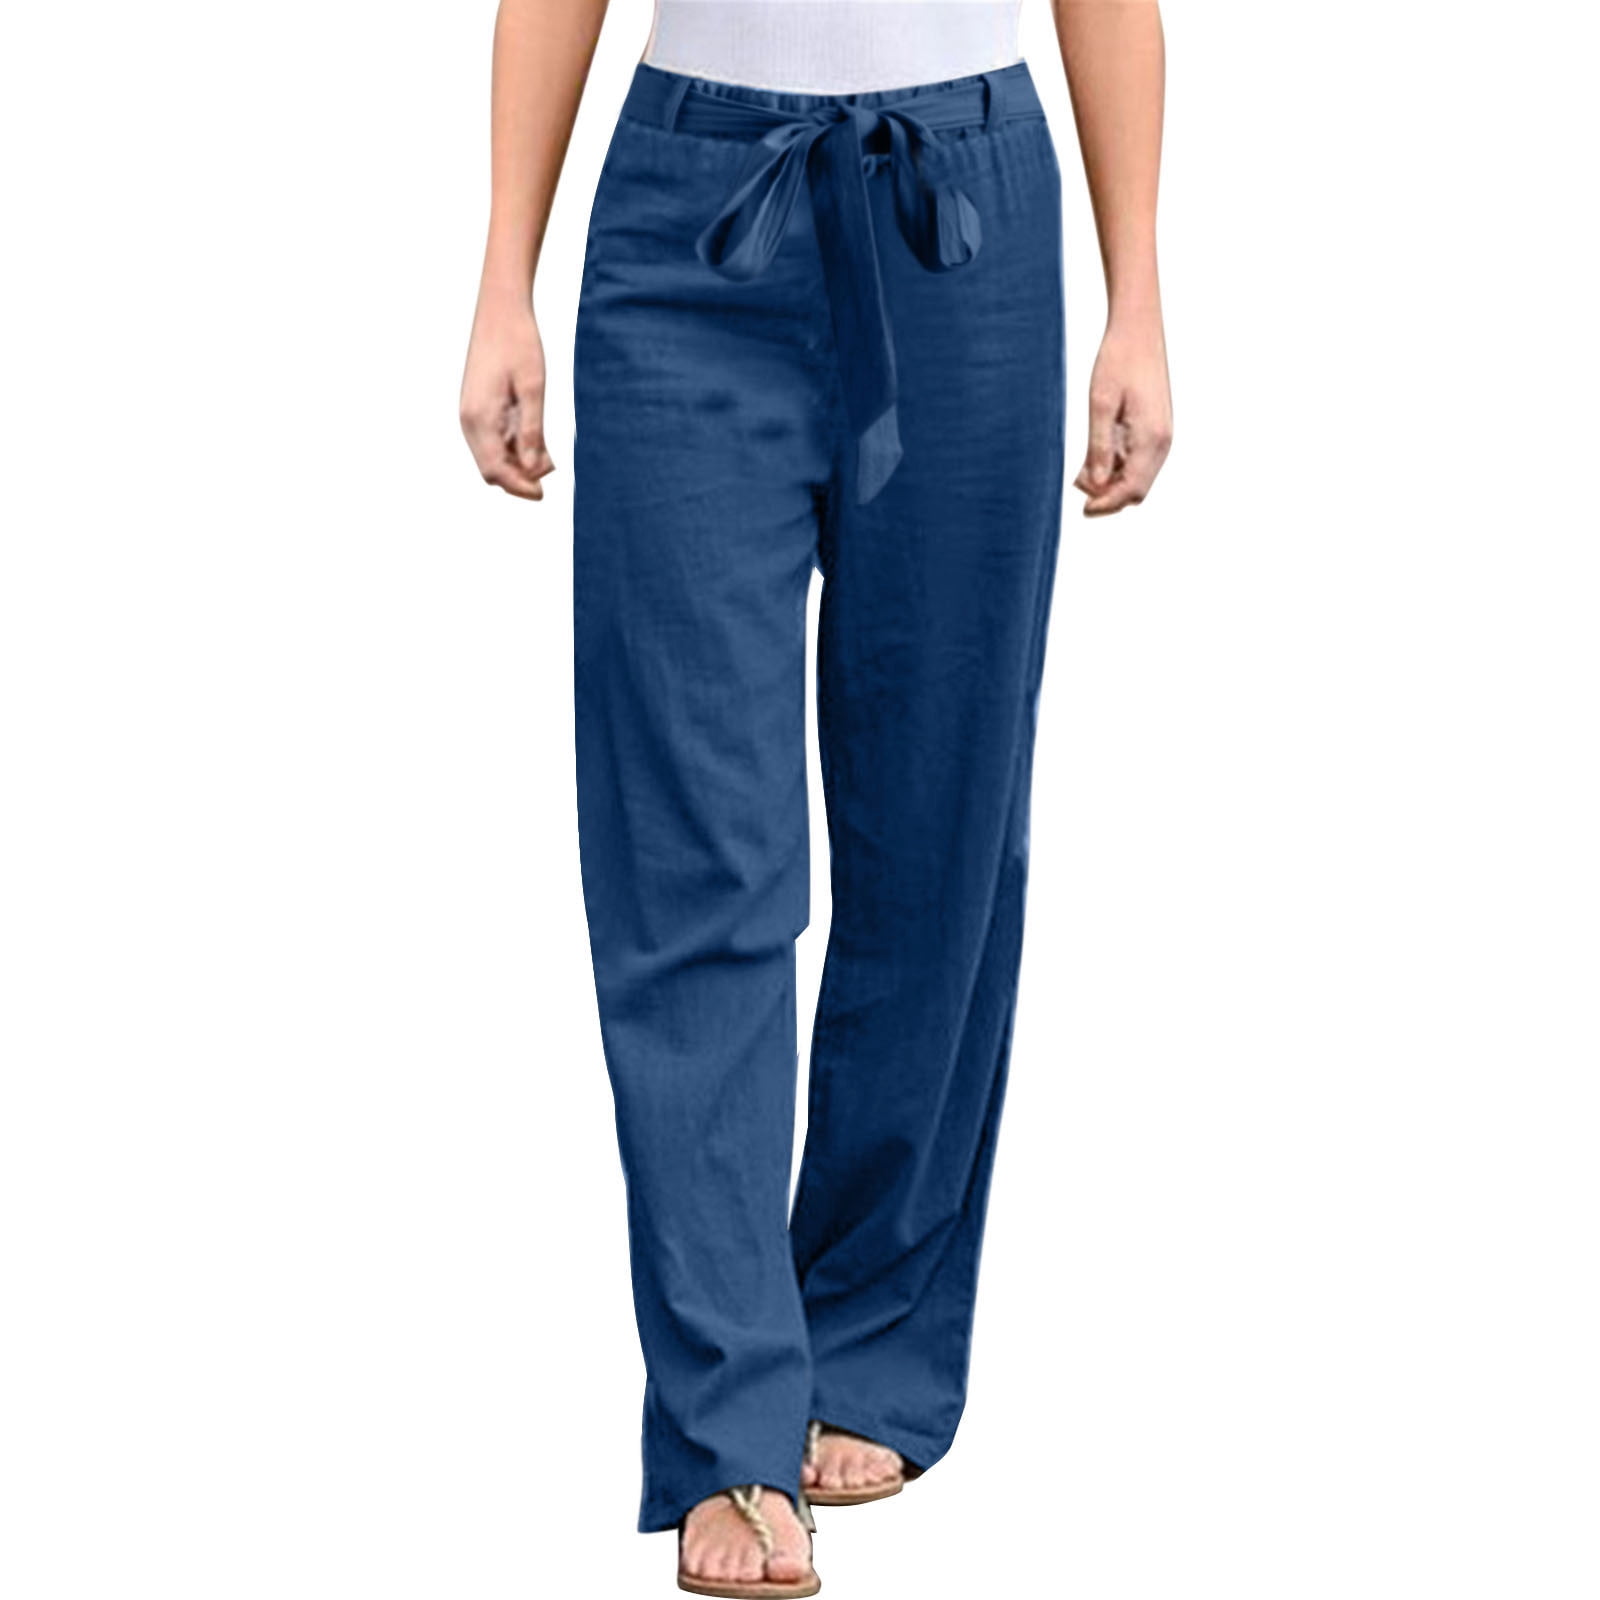 Women Comfy Cotton Linen Pants Solid Button Elastic Waist Pants with  Pockets Caual Rolled Hem Pants for Work Outdoor(XL,Blue)